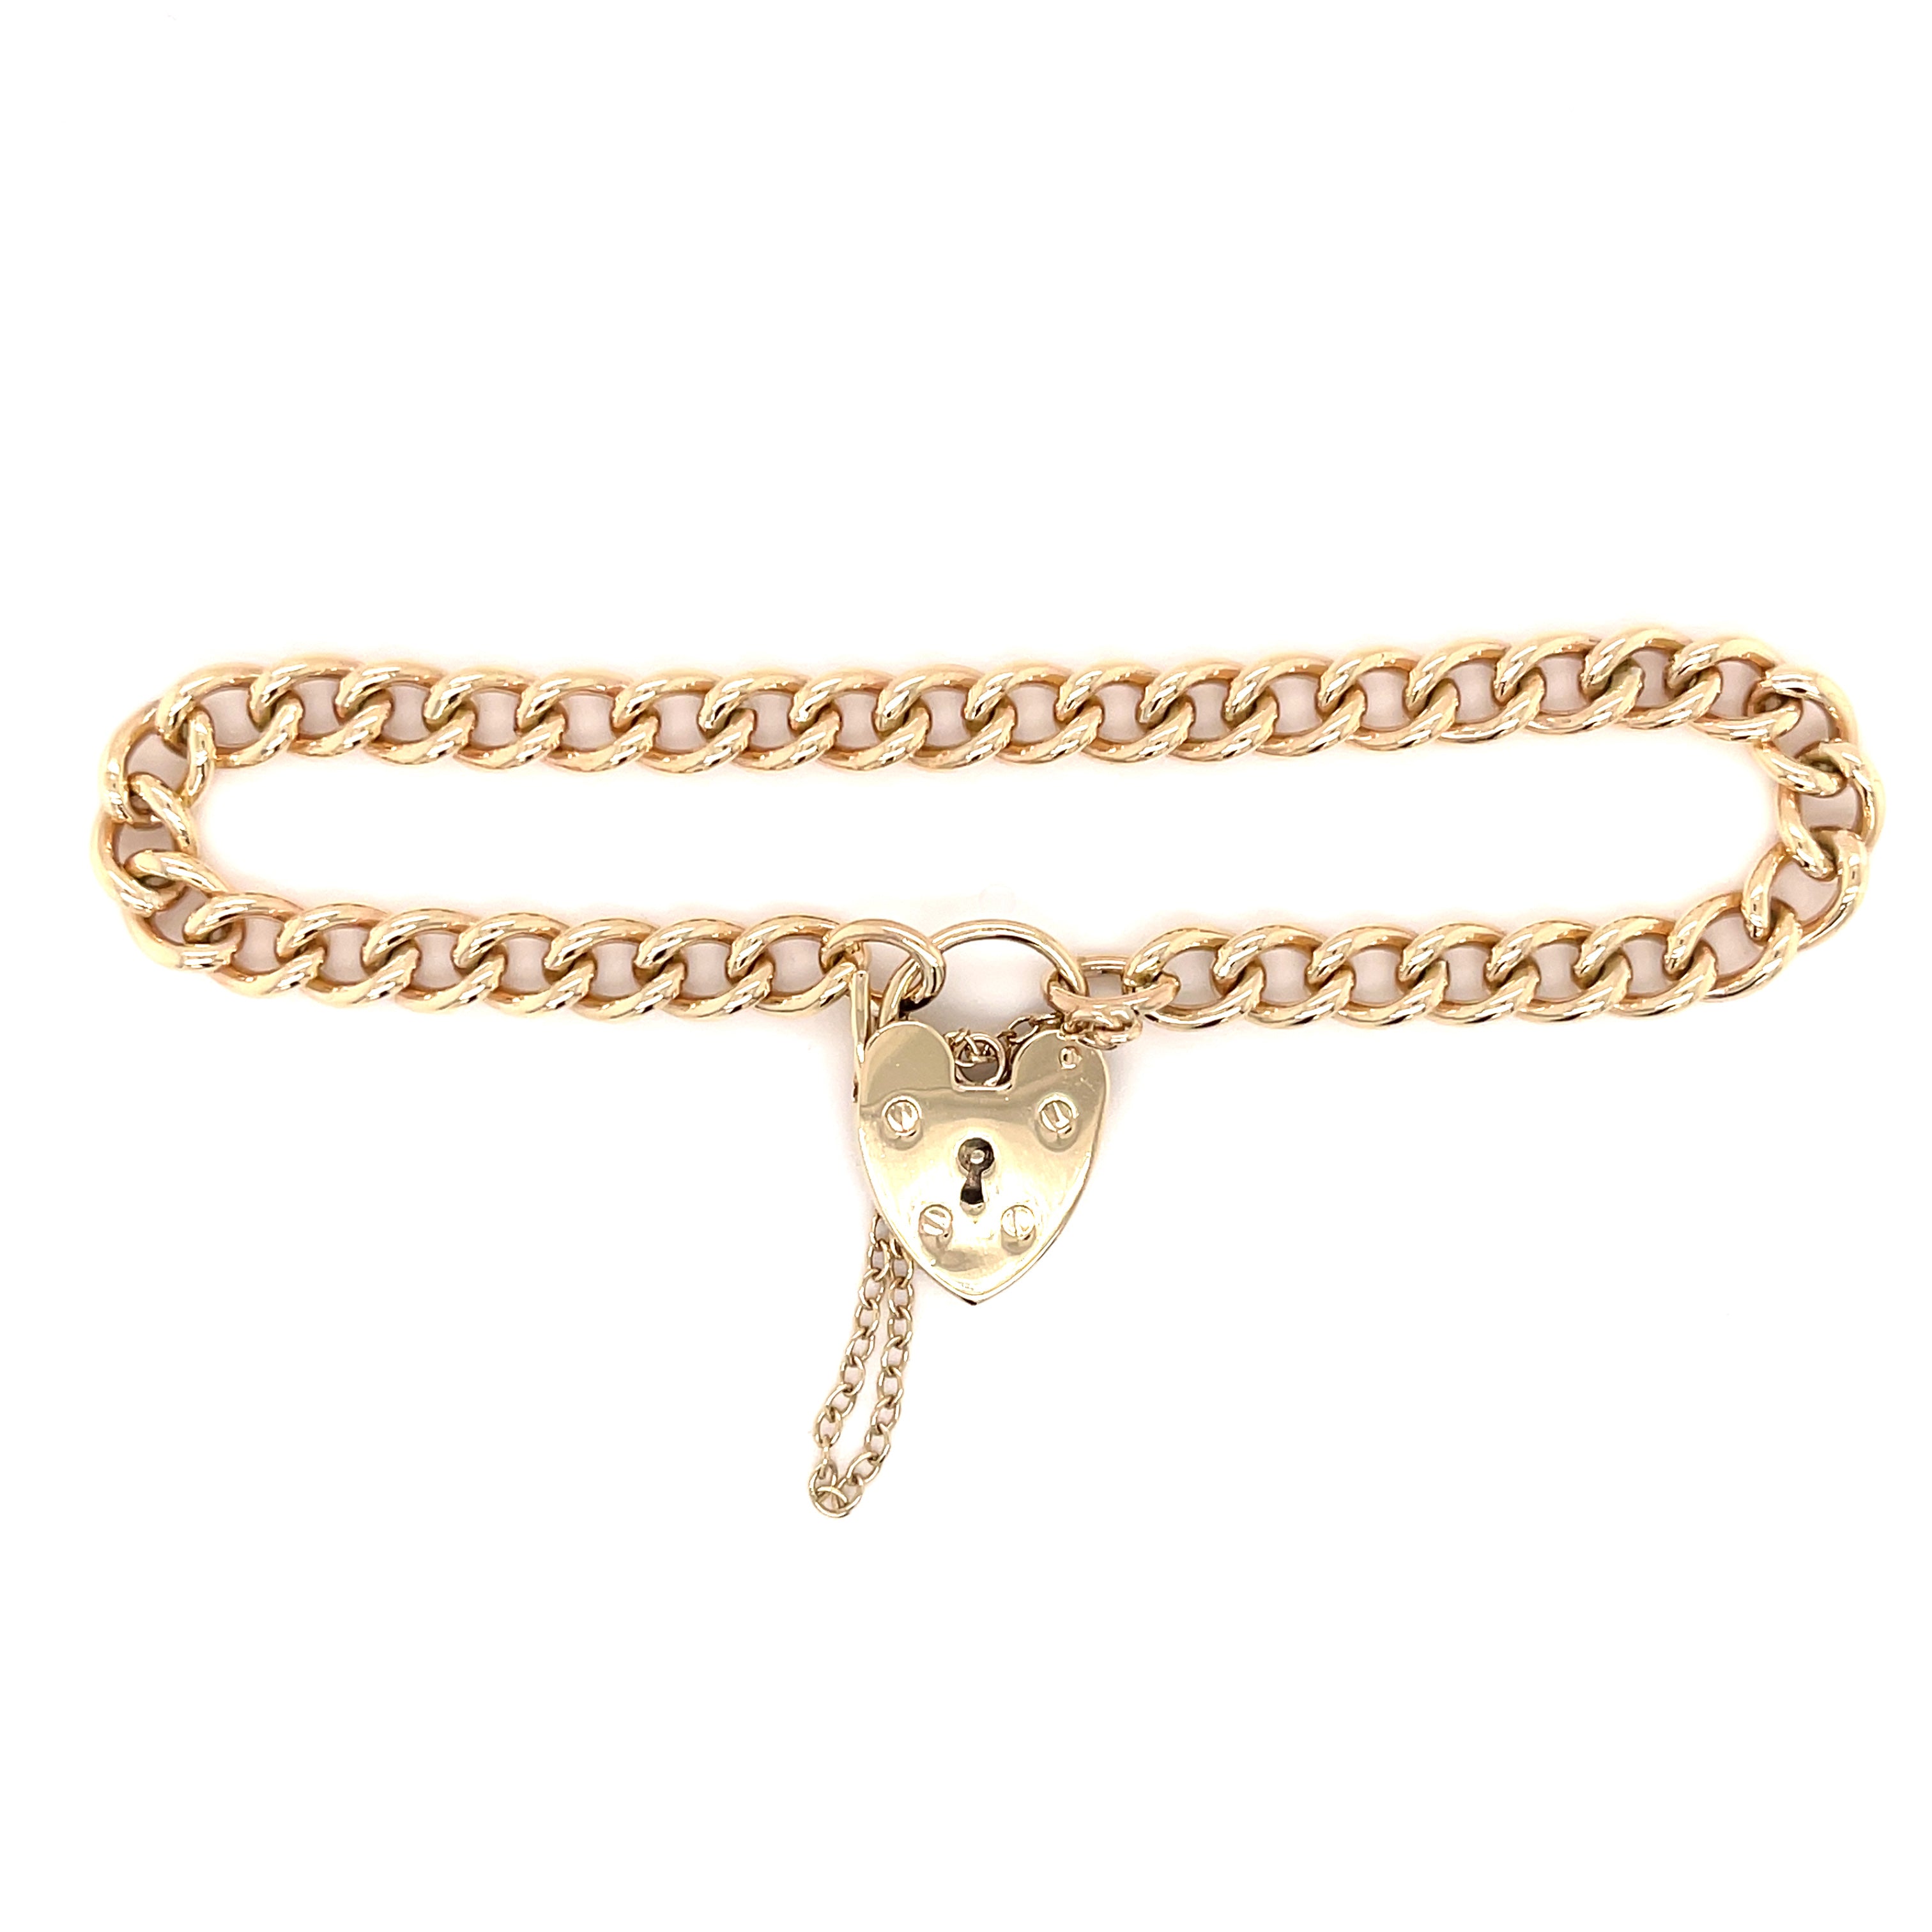 Vintage 9ct Yellow Gold 7" Traditional Heart Padlock Charm Bracelet - 15.55g SOLD